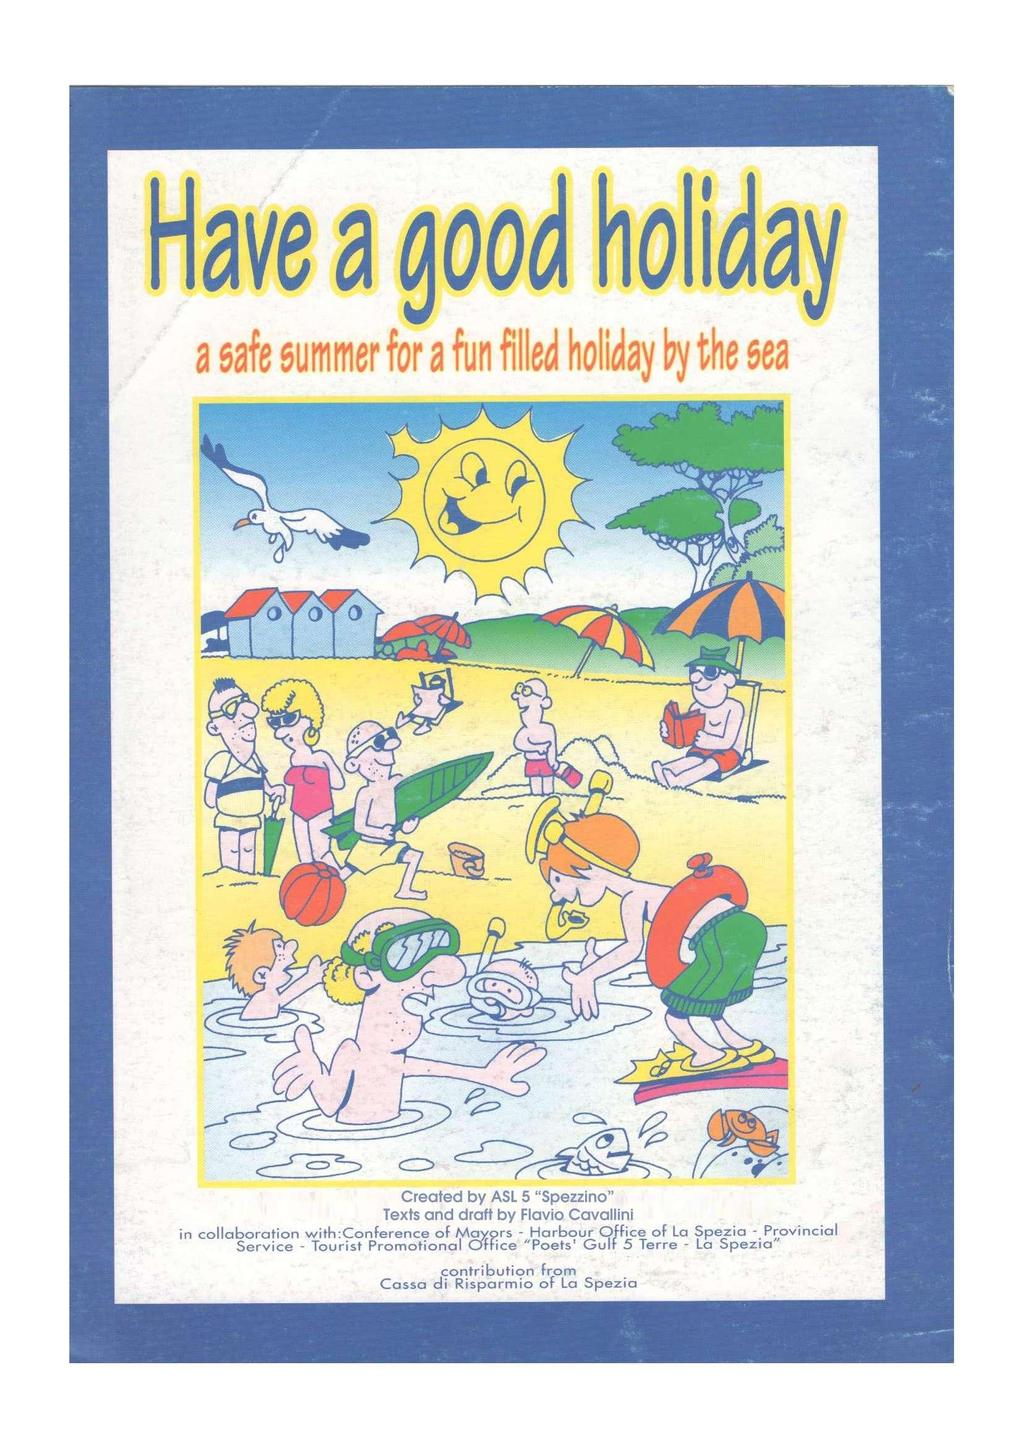 Have a good holiday a safe summer for a fun filled holiday by the sea Created by ASL 5 "Spezzino" Texts and draft by Flavio Cavallini in collaboration with:conference of